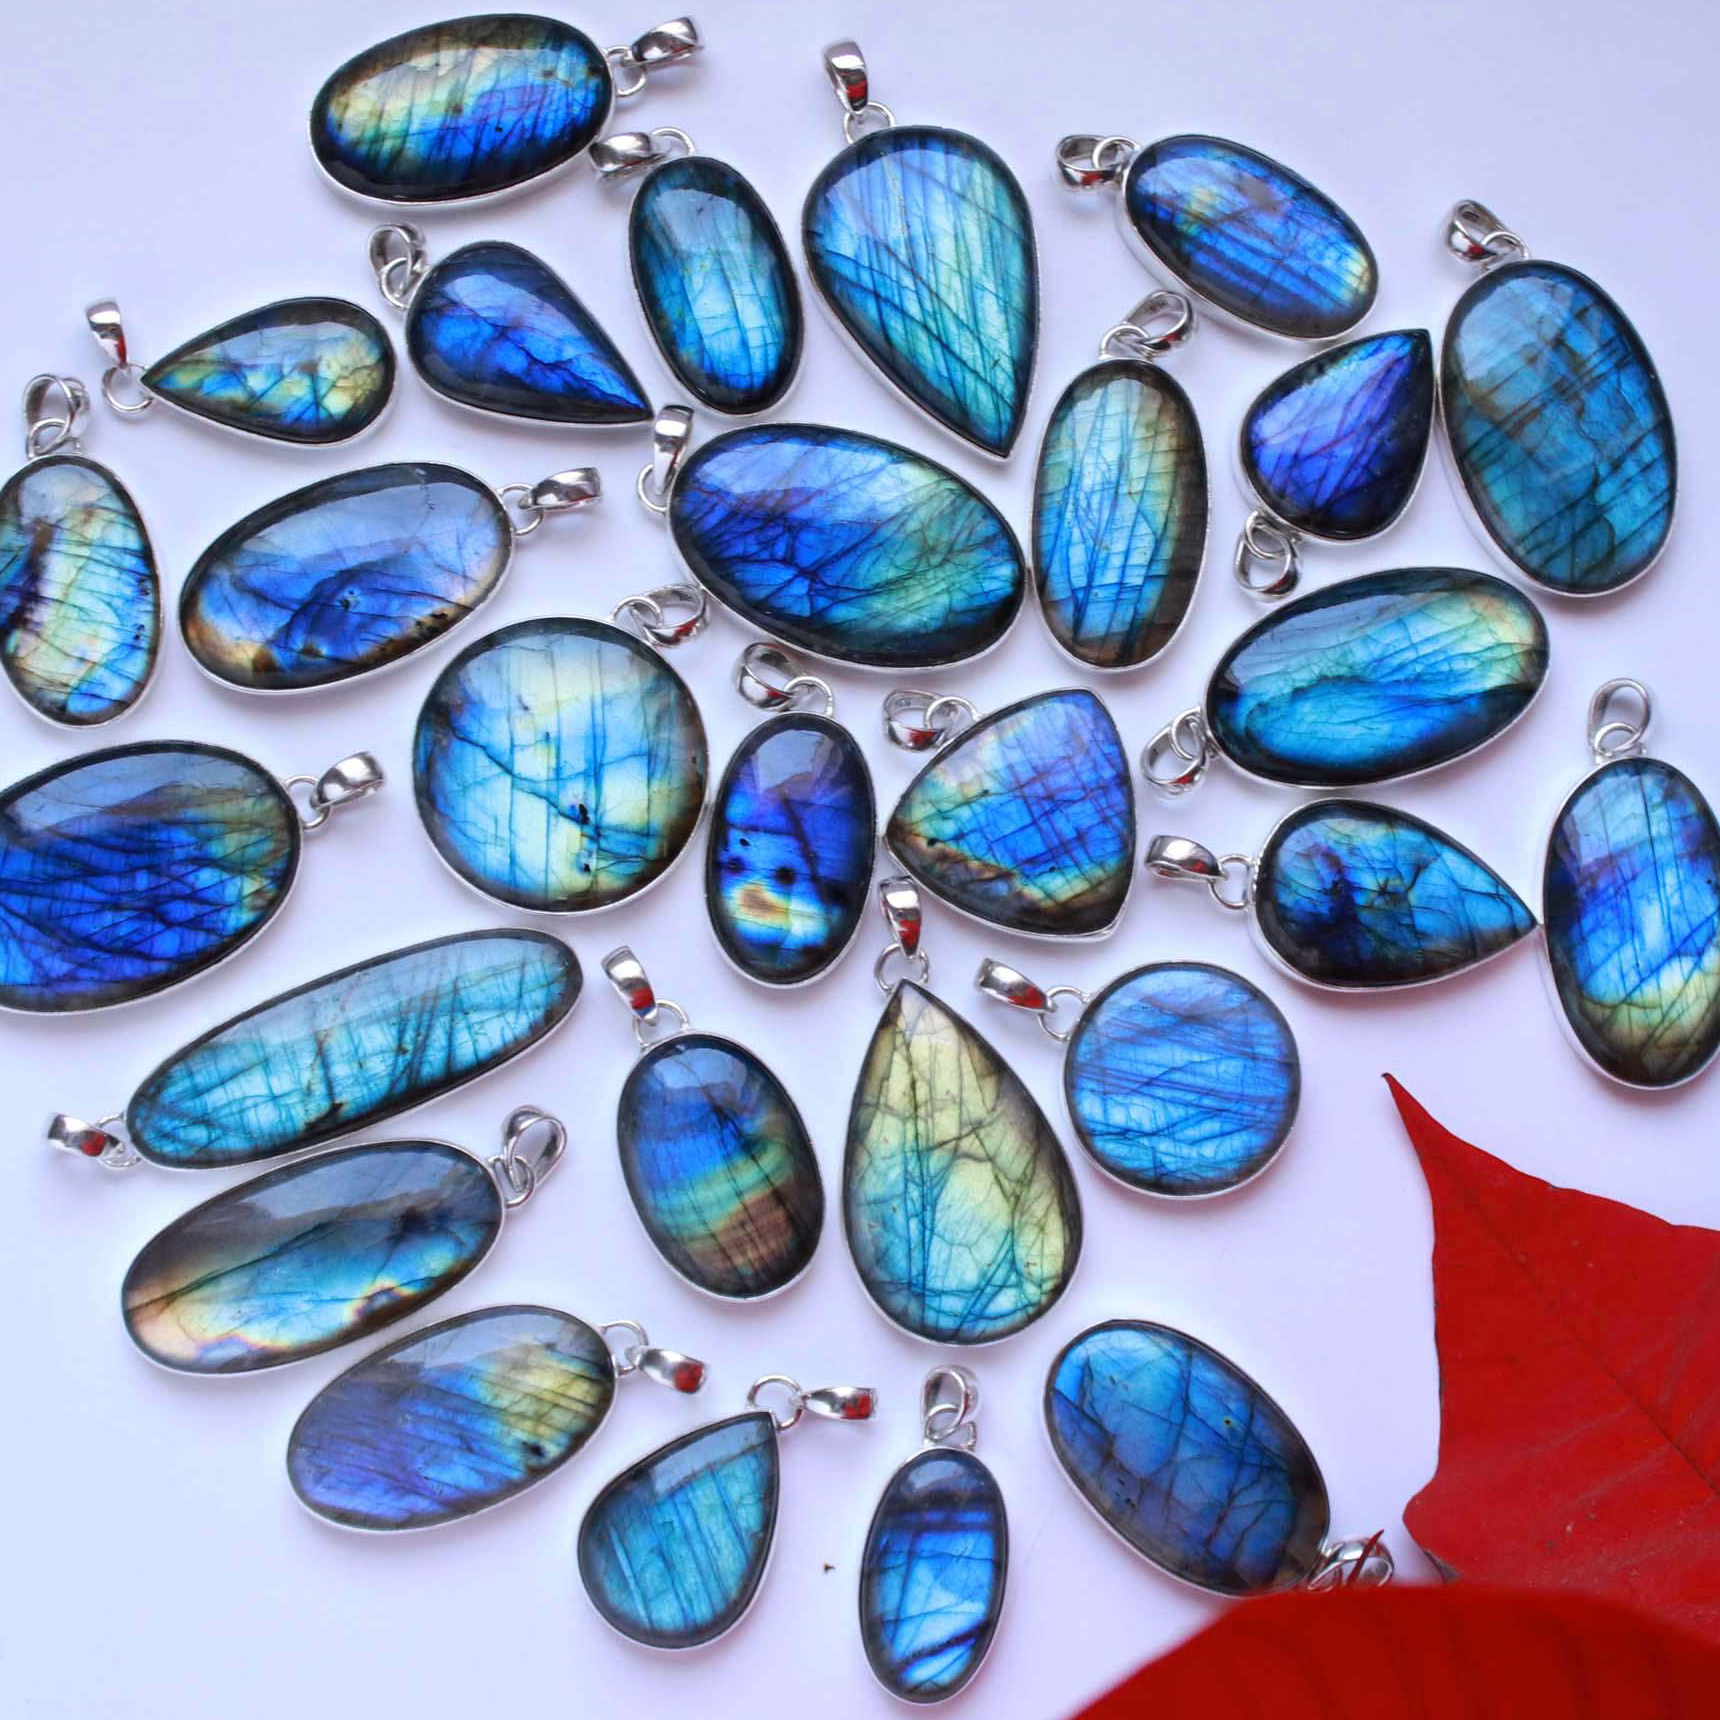 Natural labradorite 92.5 silver plated Mix cabochon gemstone pendant wholesale price Necklace Pendant For Jewelry